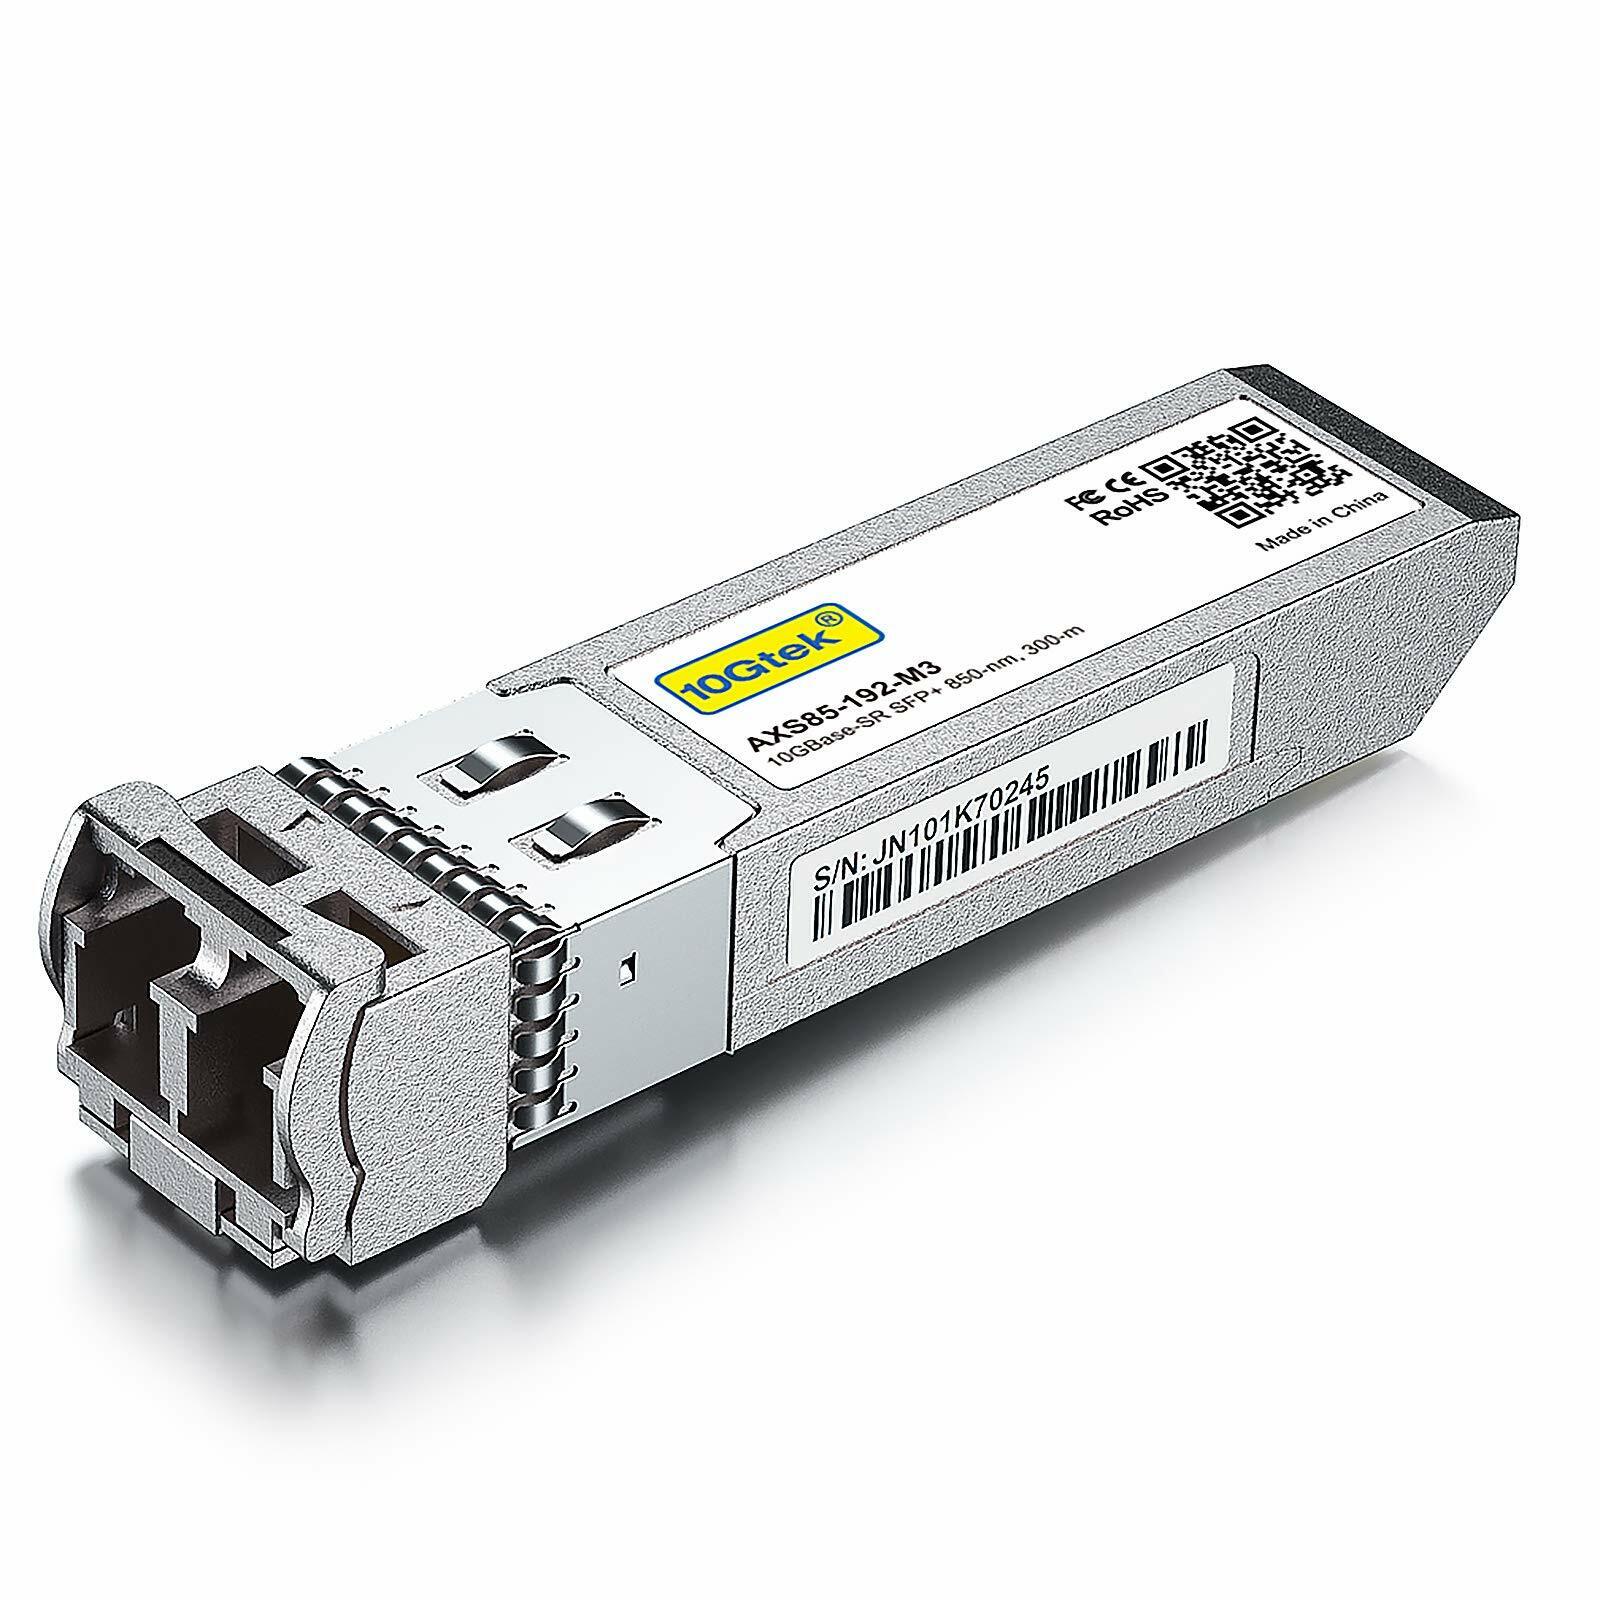 For Arista SFP-10G-SR 10GBase-SR SFP+ Transceiver 10G 850nm MMF up to 300 Meters